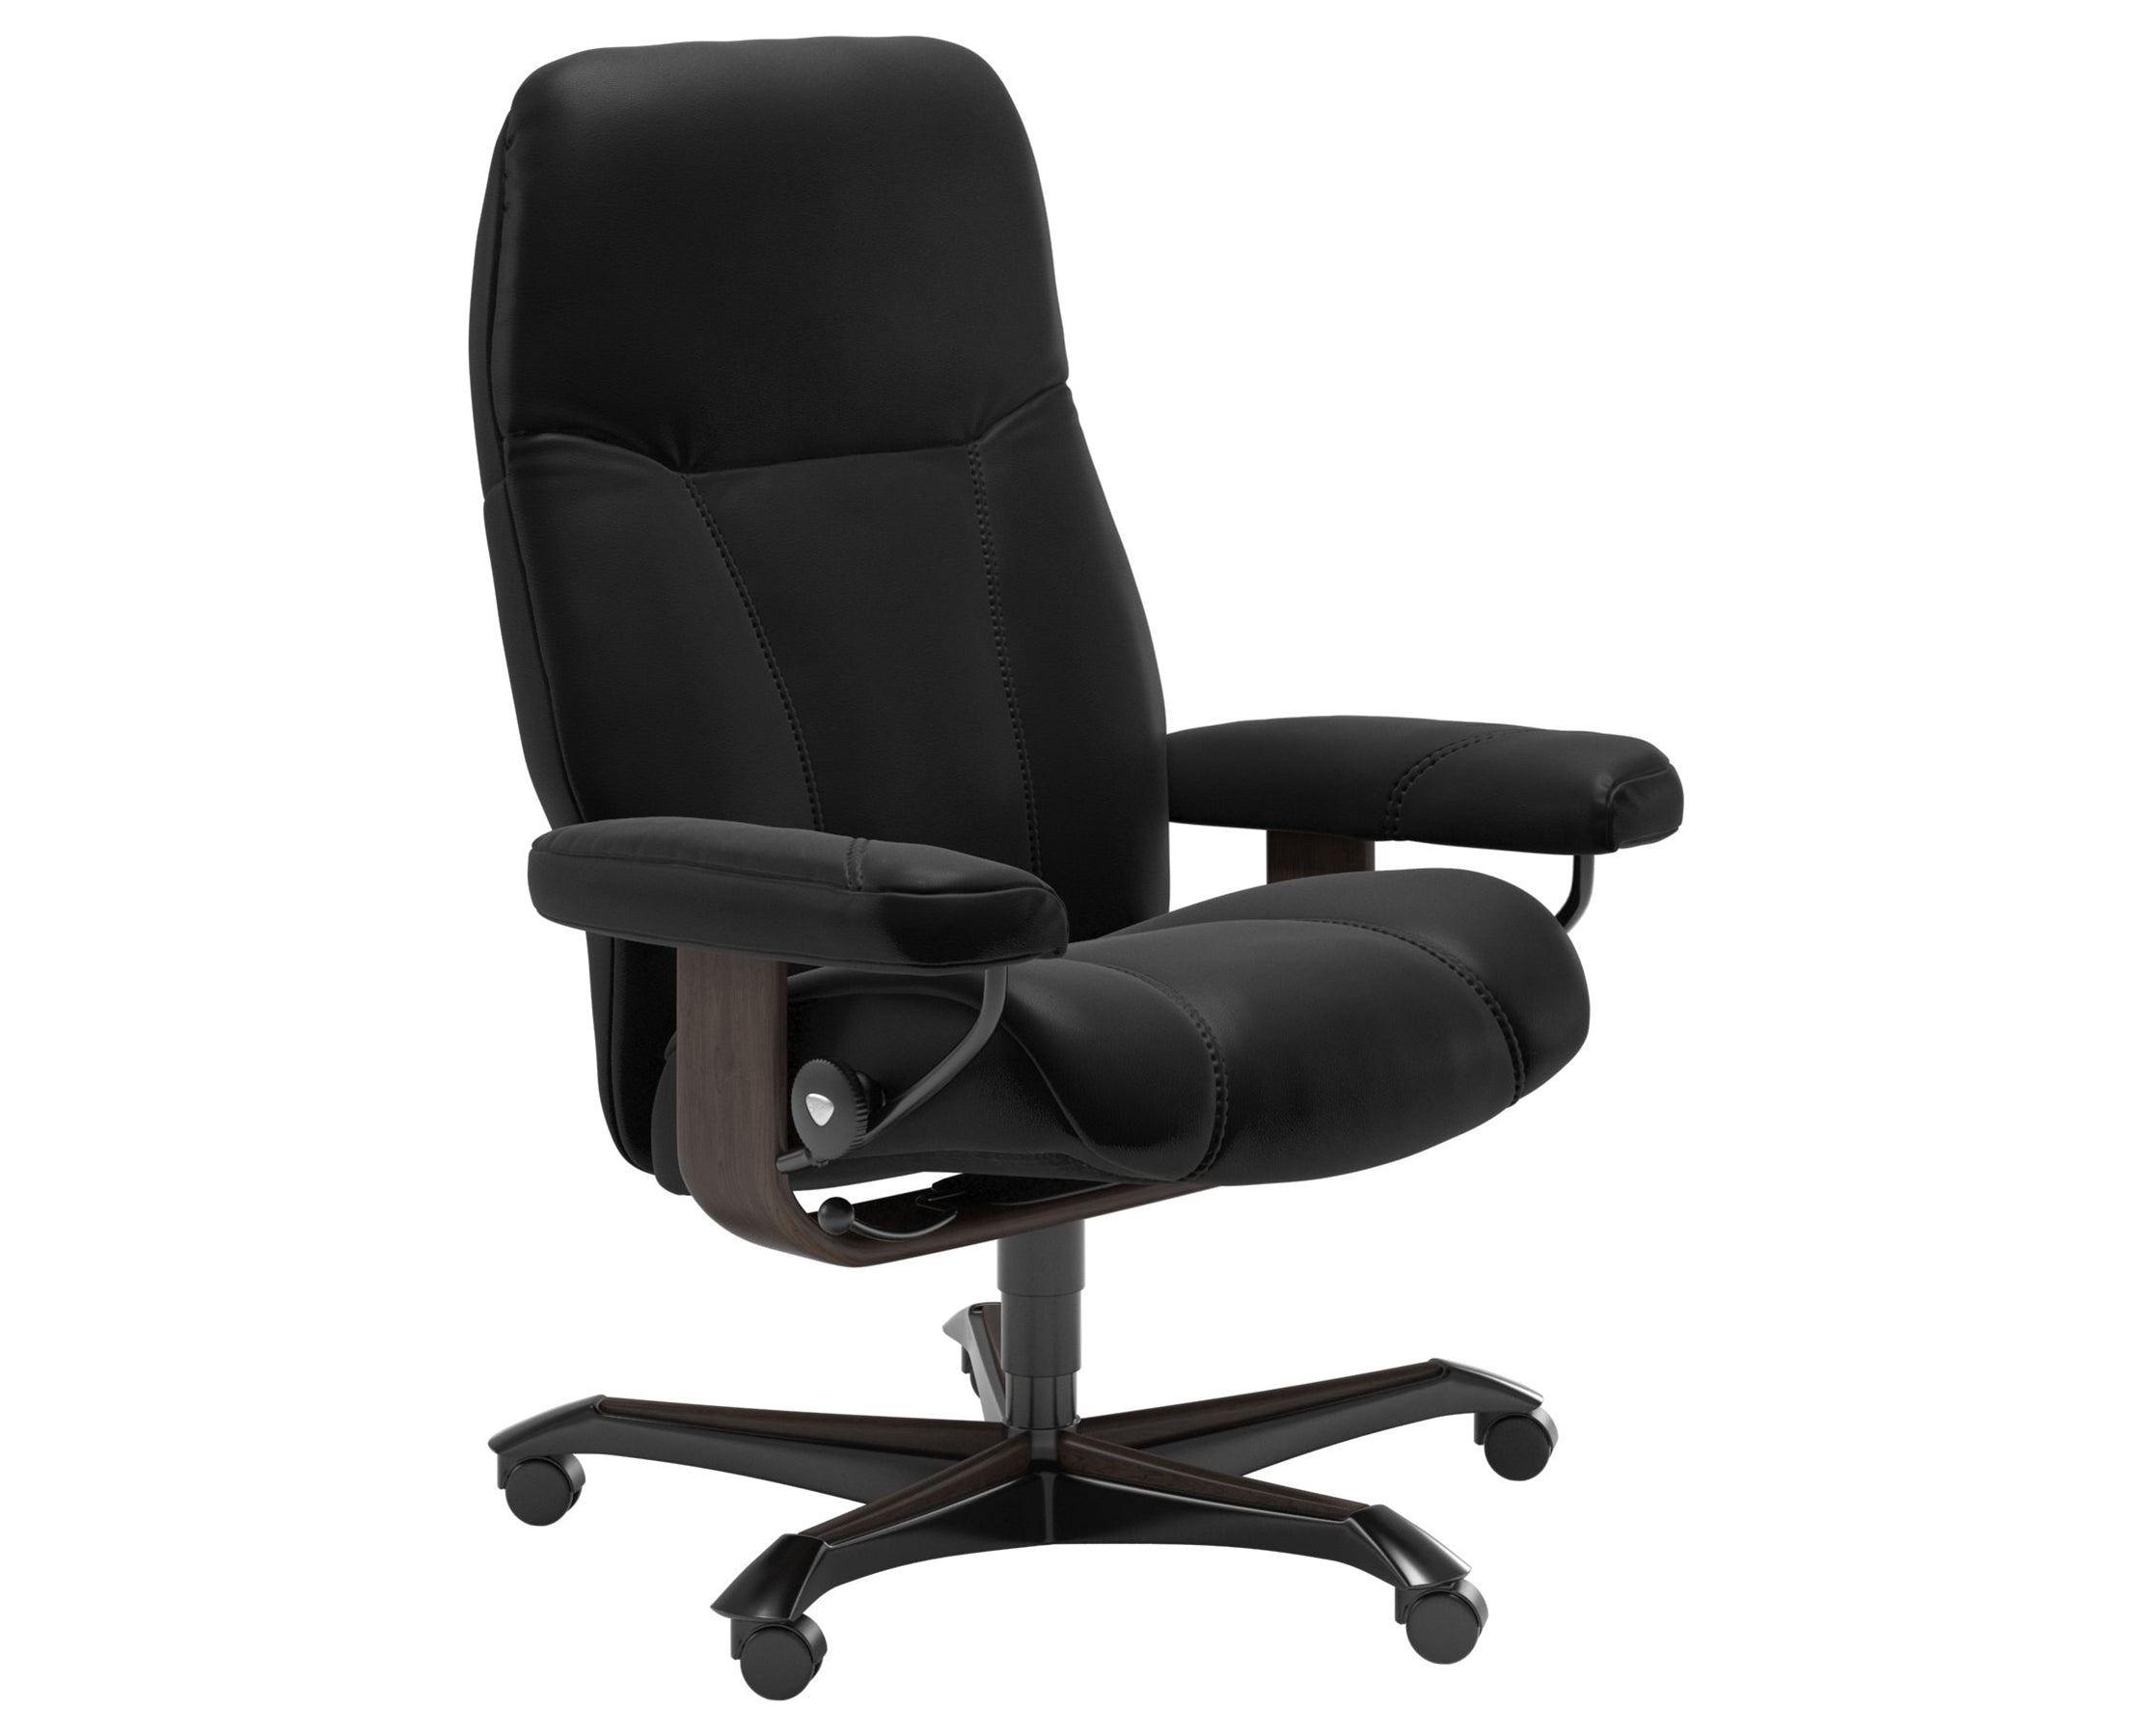 Batick Leather Black M and Wenge Base | Stressless Consul Home Office Chair | Valley Ridge Furniture